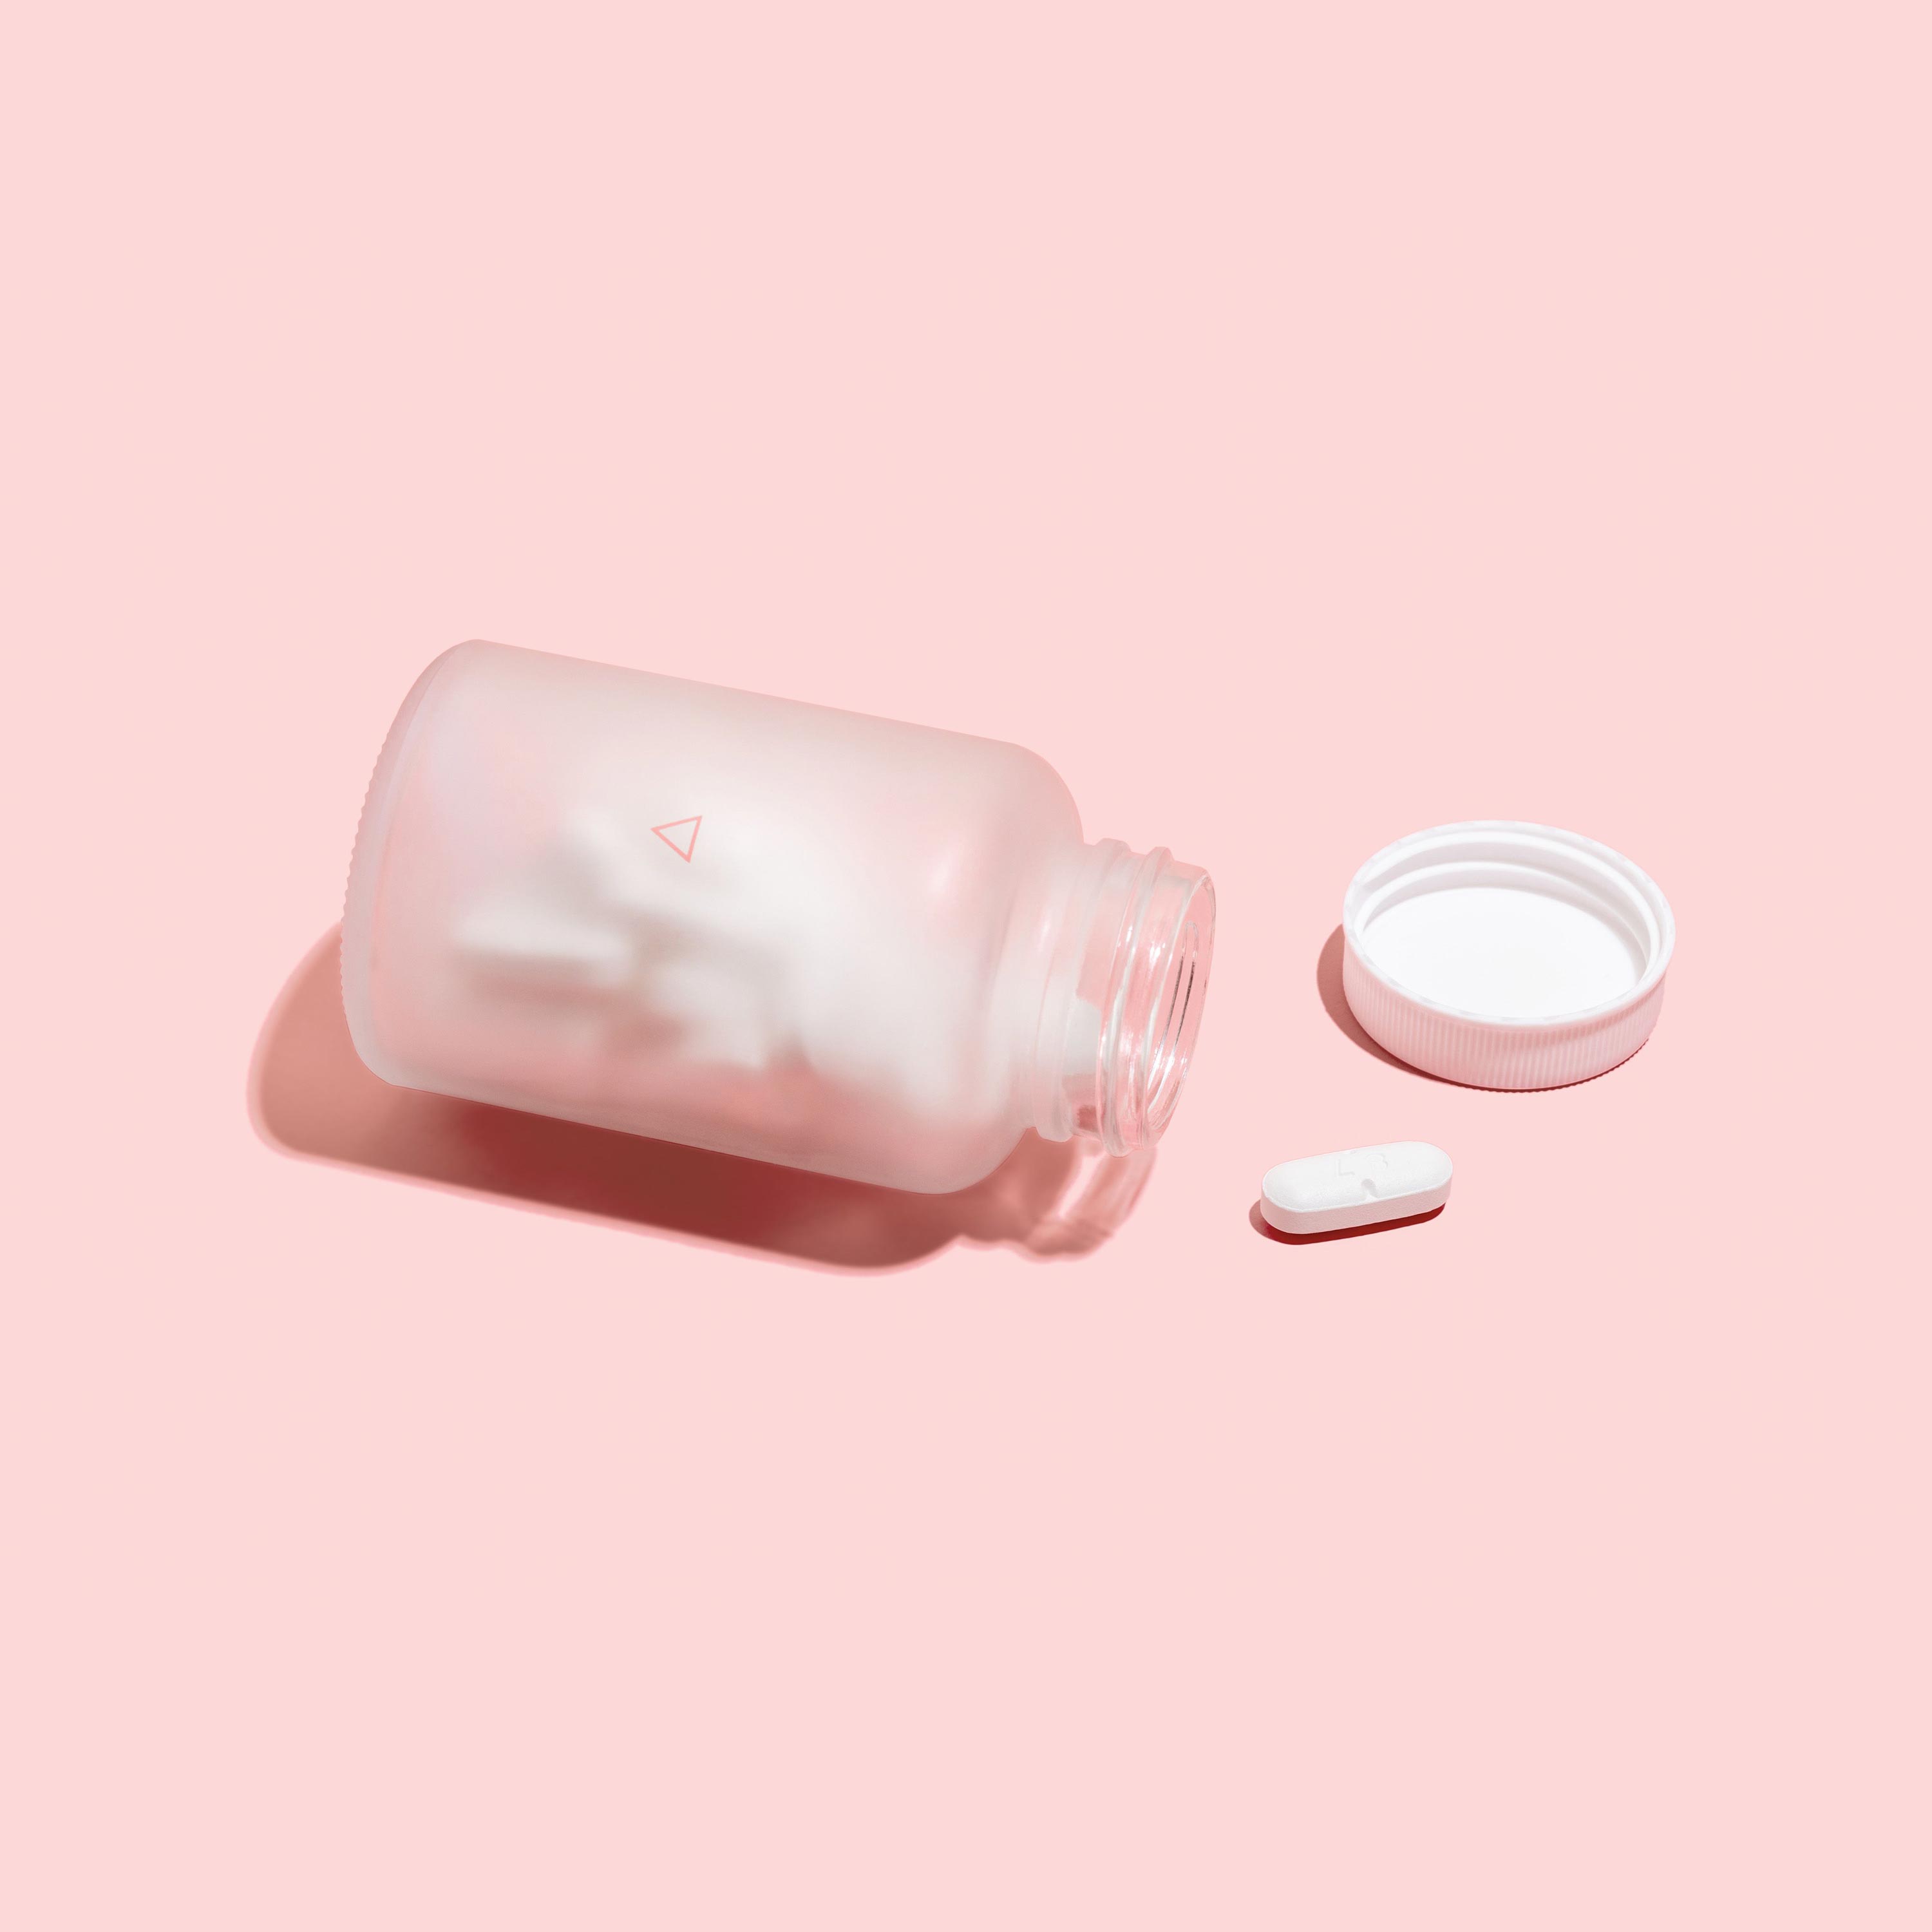 Bottle of Valacyclovir open on its side, on a pink background